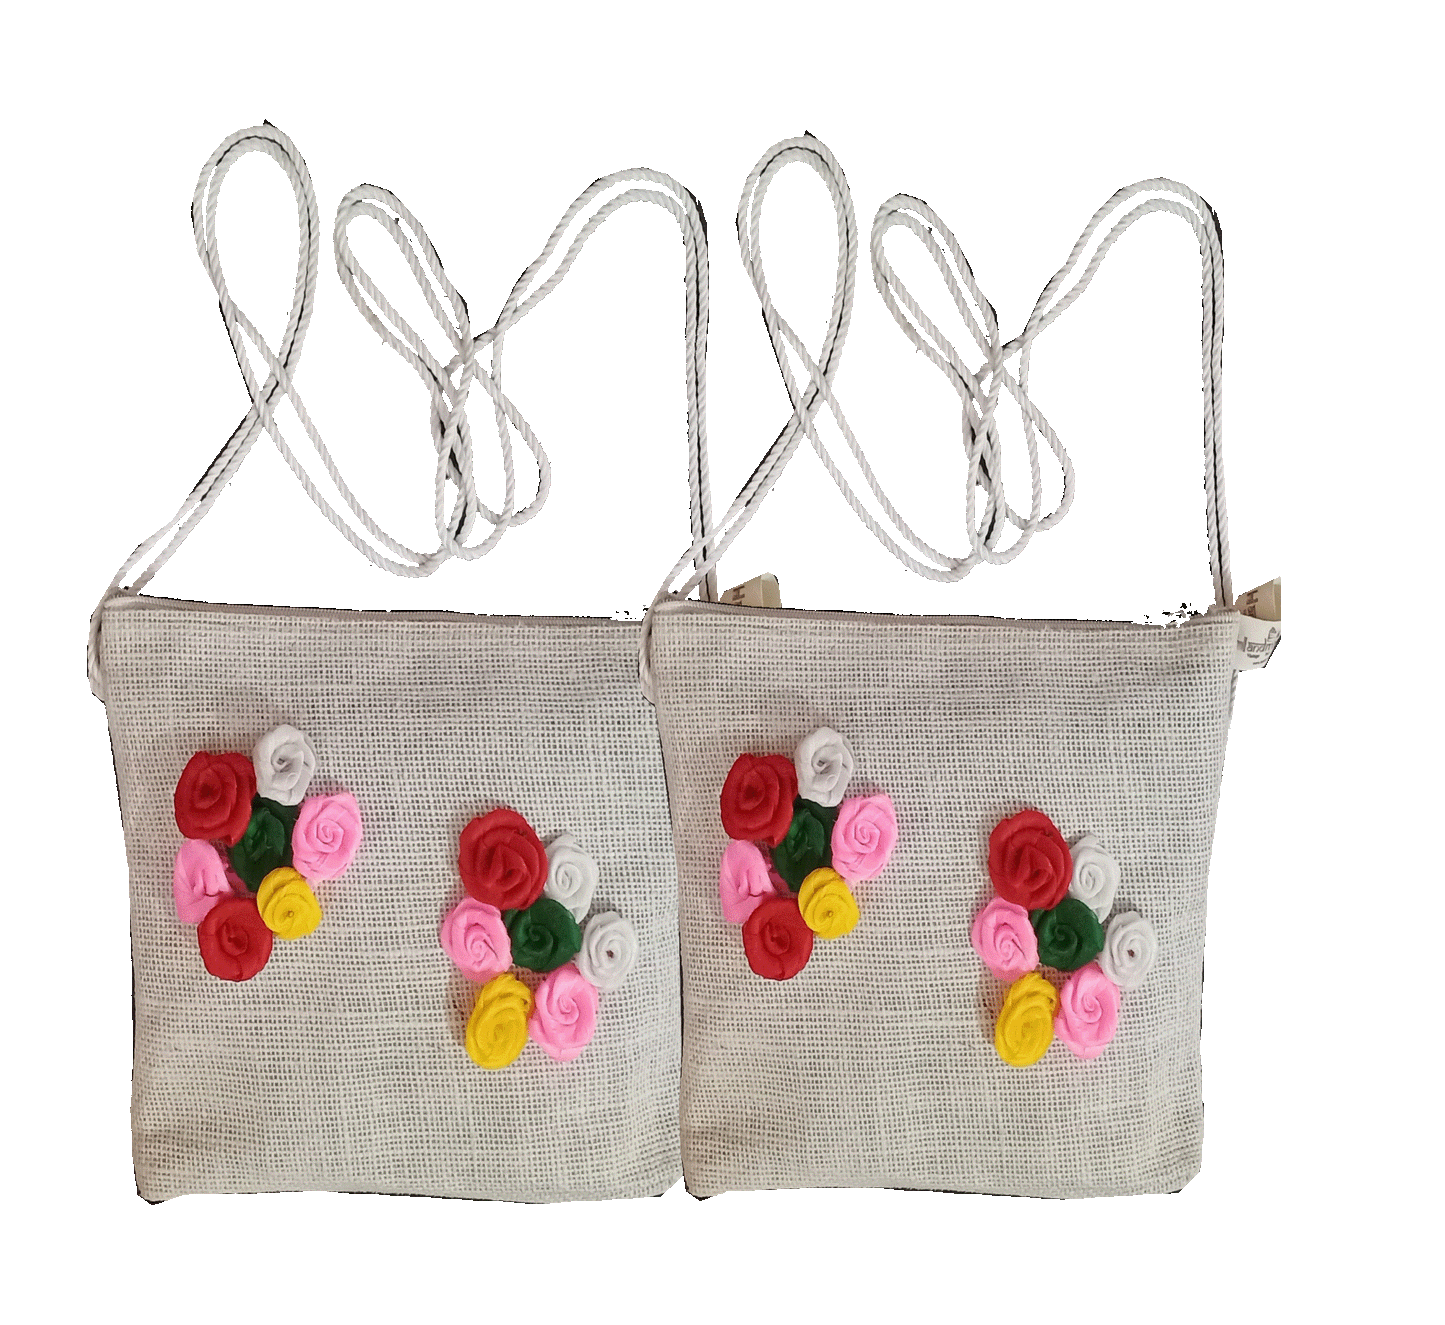 Natural Pure White Jute Bag With Flower Design